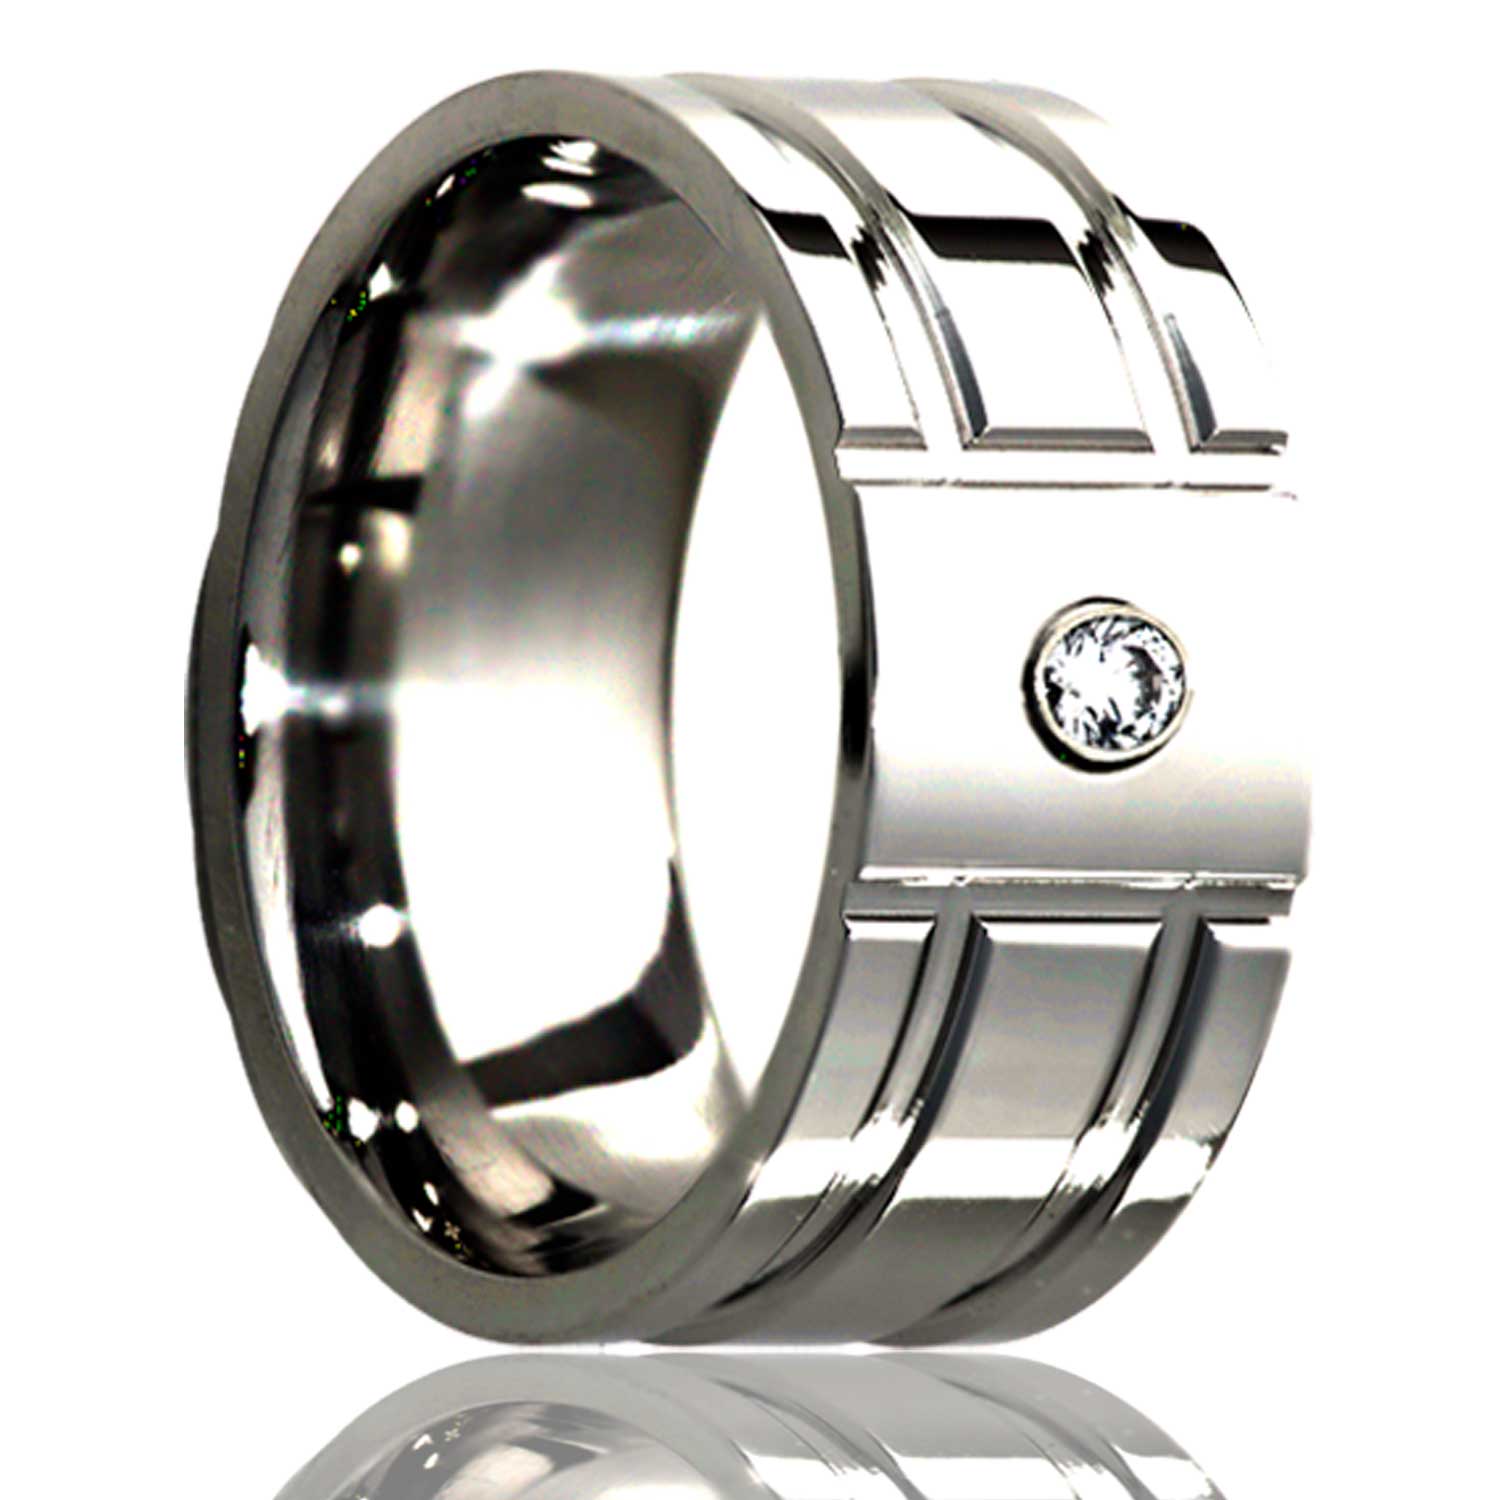 A grooved titanium men's wedding band with diamond displayed on a neutral white background.